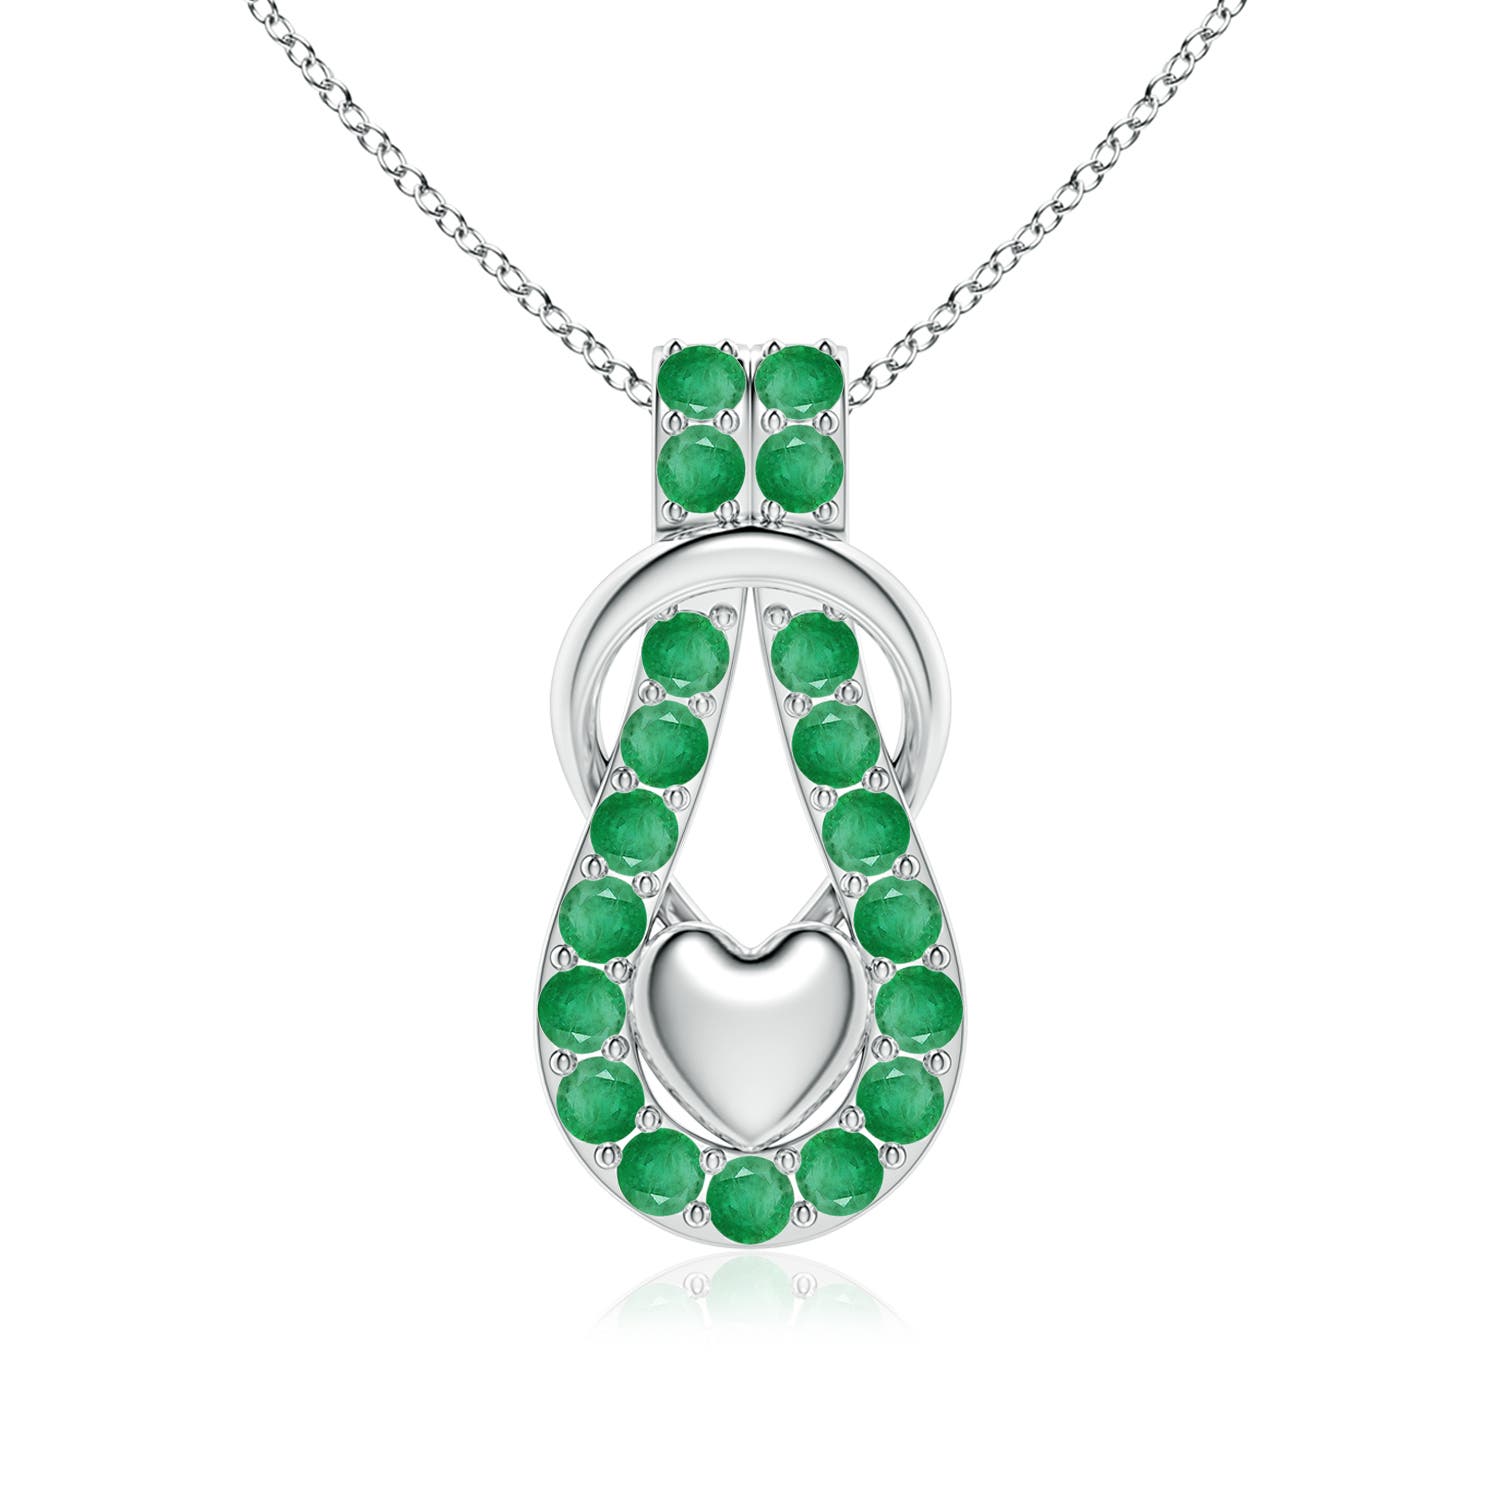 A - Emerald / 1.9 CT / 14 KT White Gold